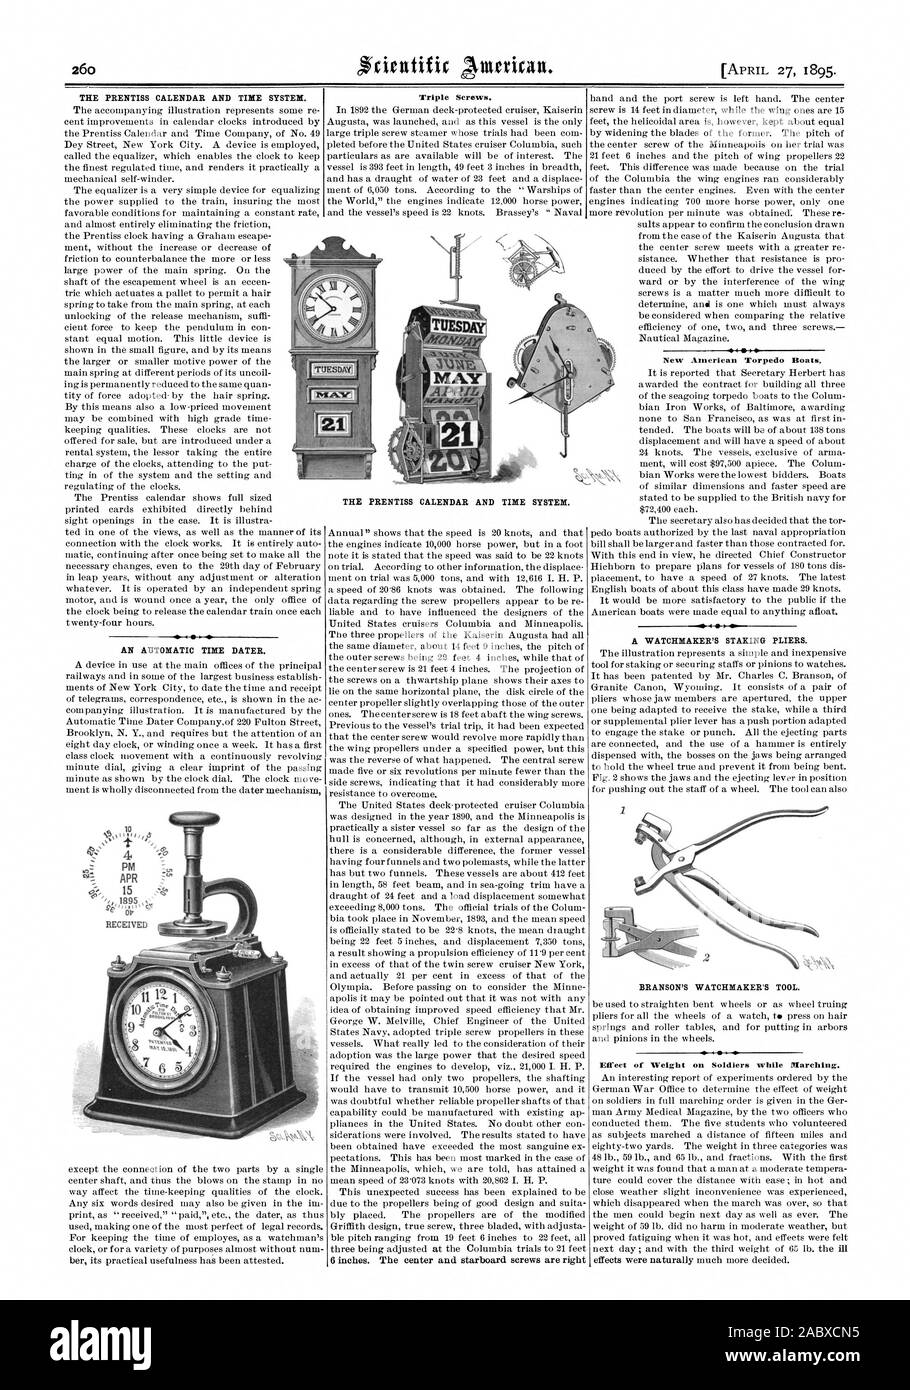 THE PRENTISS CALENDAR AND TIME SYSTEM. AN AUTOMATIC TIME DATER. Triple Screws. 6 inches. The center and starboard screws are right New American Torpedo Boats. A WATCHMAKER'S STAKING PLIERS. BRANSON'S WATCHMAKER'S TOOL. Effect of Weight on Soldiers while Marching. effects were naturally much more decided. THE PRENTISS CALENDAR AND TIME SYSTEM., scientific american, 1895-04-27 Stock Photo